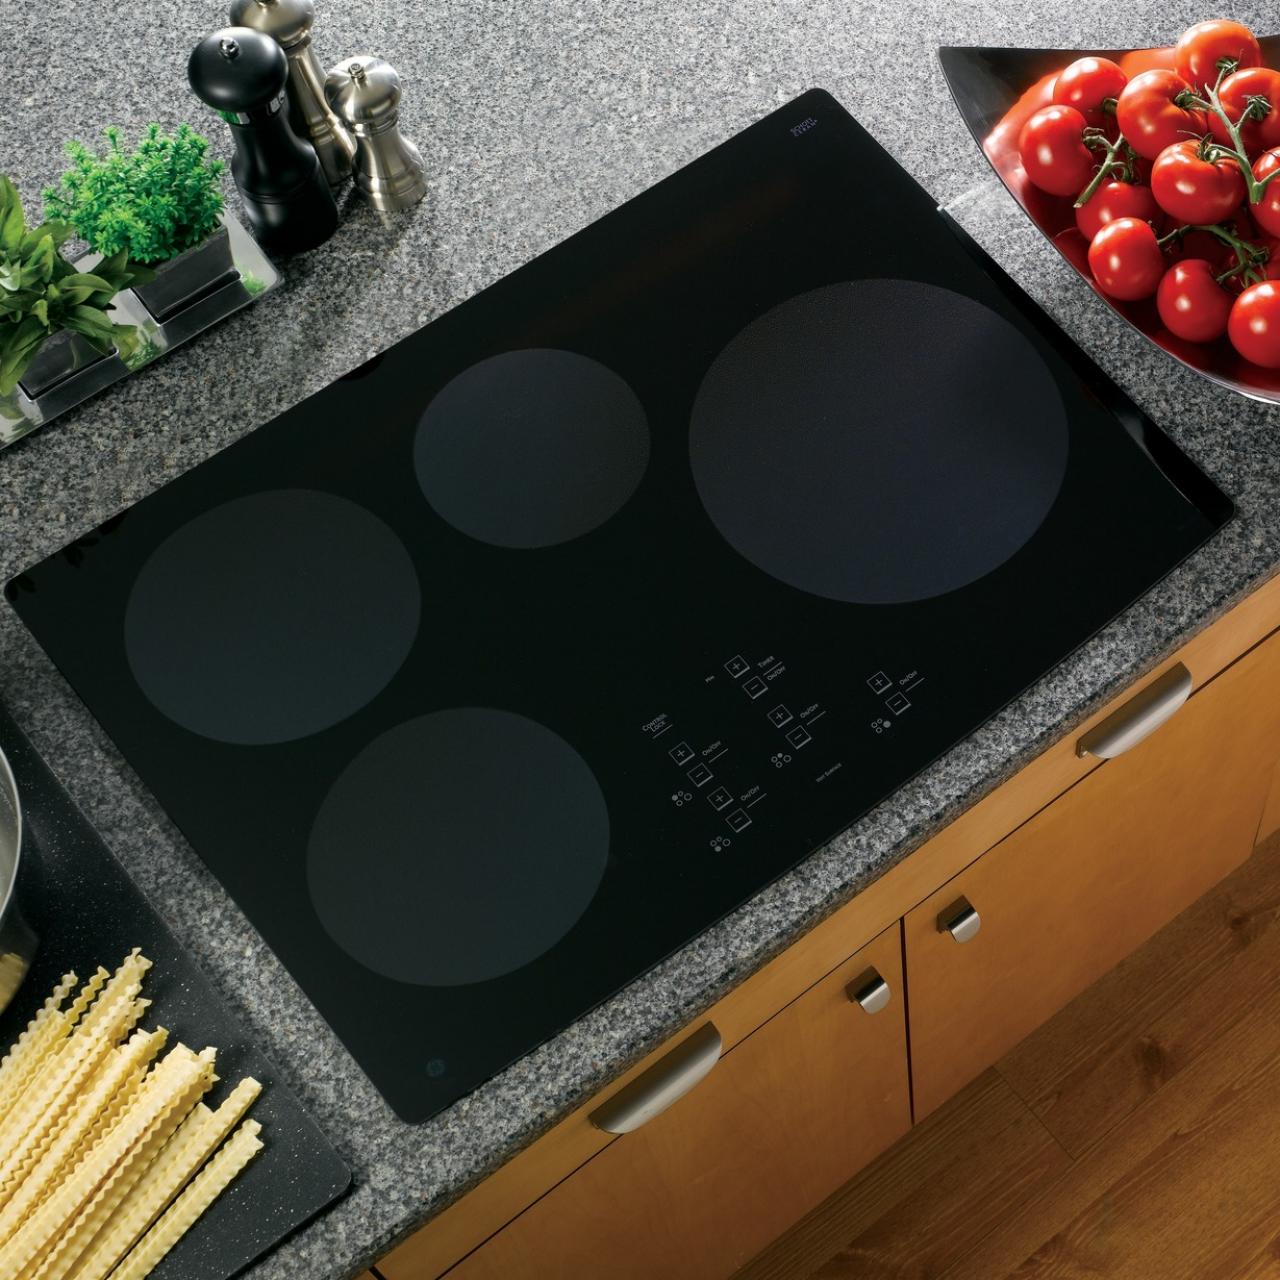 https://food.fnr.sndimg.com/content/dam/images/food/products/2022/2/23/rx_ge-induction-cooktop-lifestyle.jpg.rend.hgtvcom.1280.1280.suffix/1645632089958.jpeg